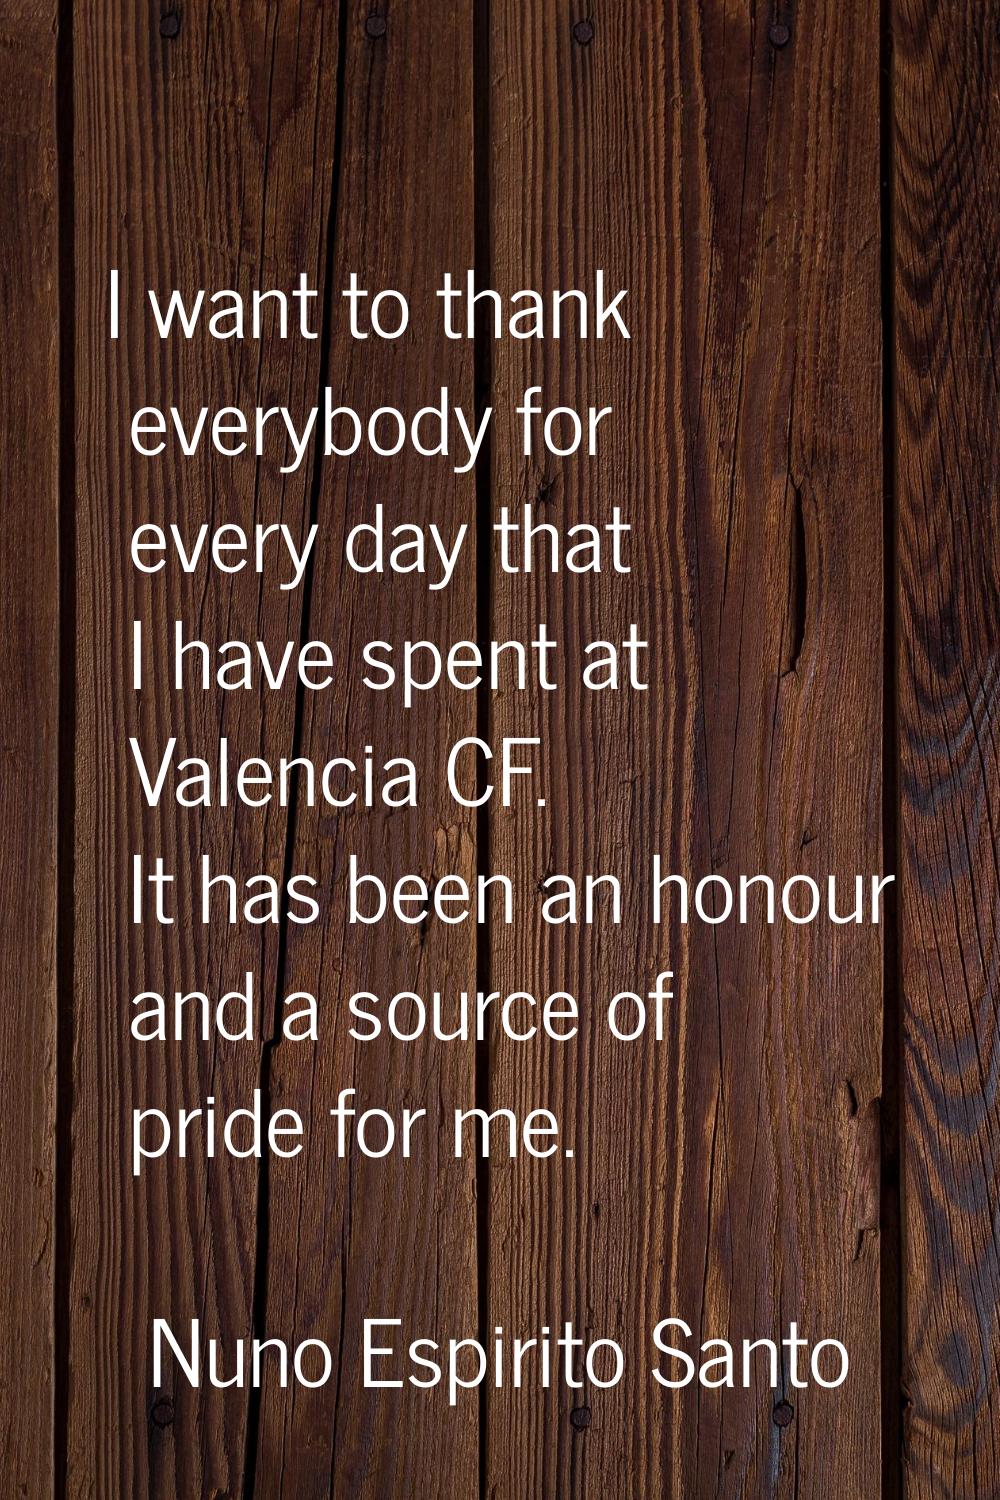 I want to thank everybody for every day that I have spent at Valencia CF. It has been an honour and